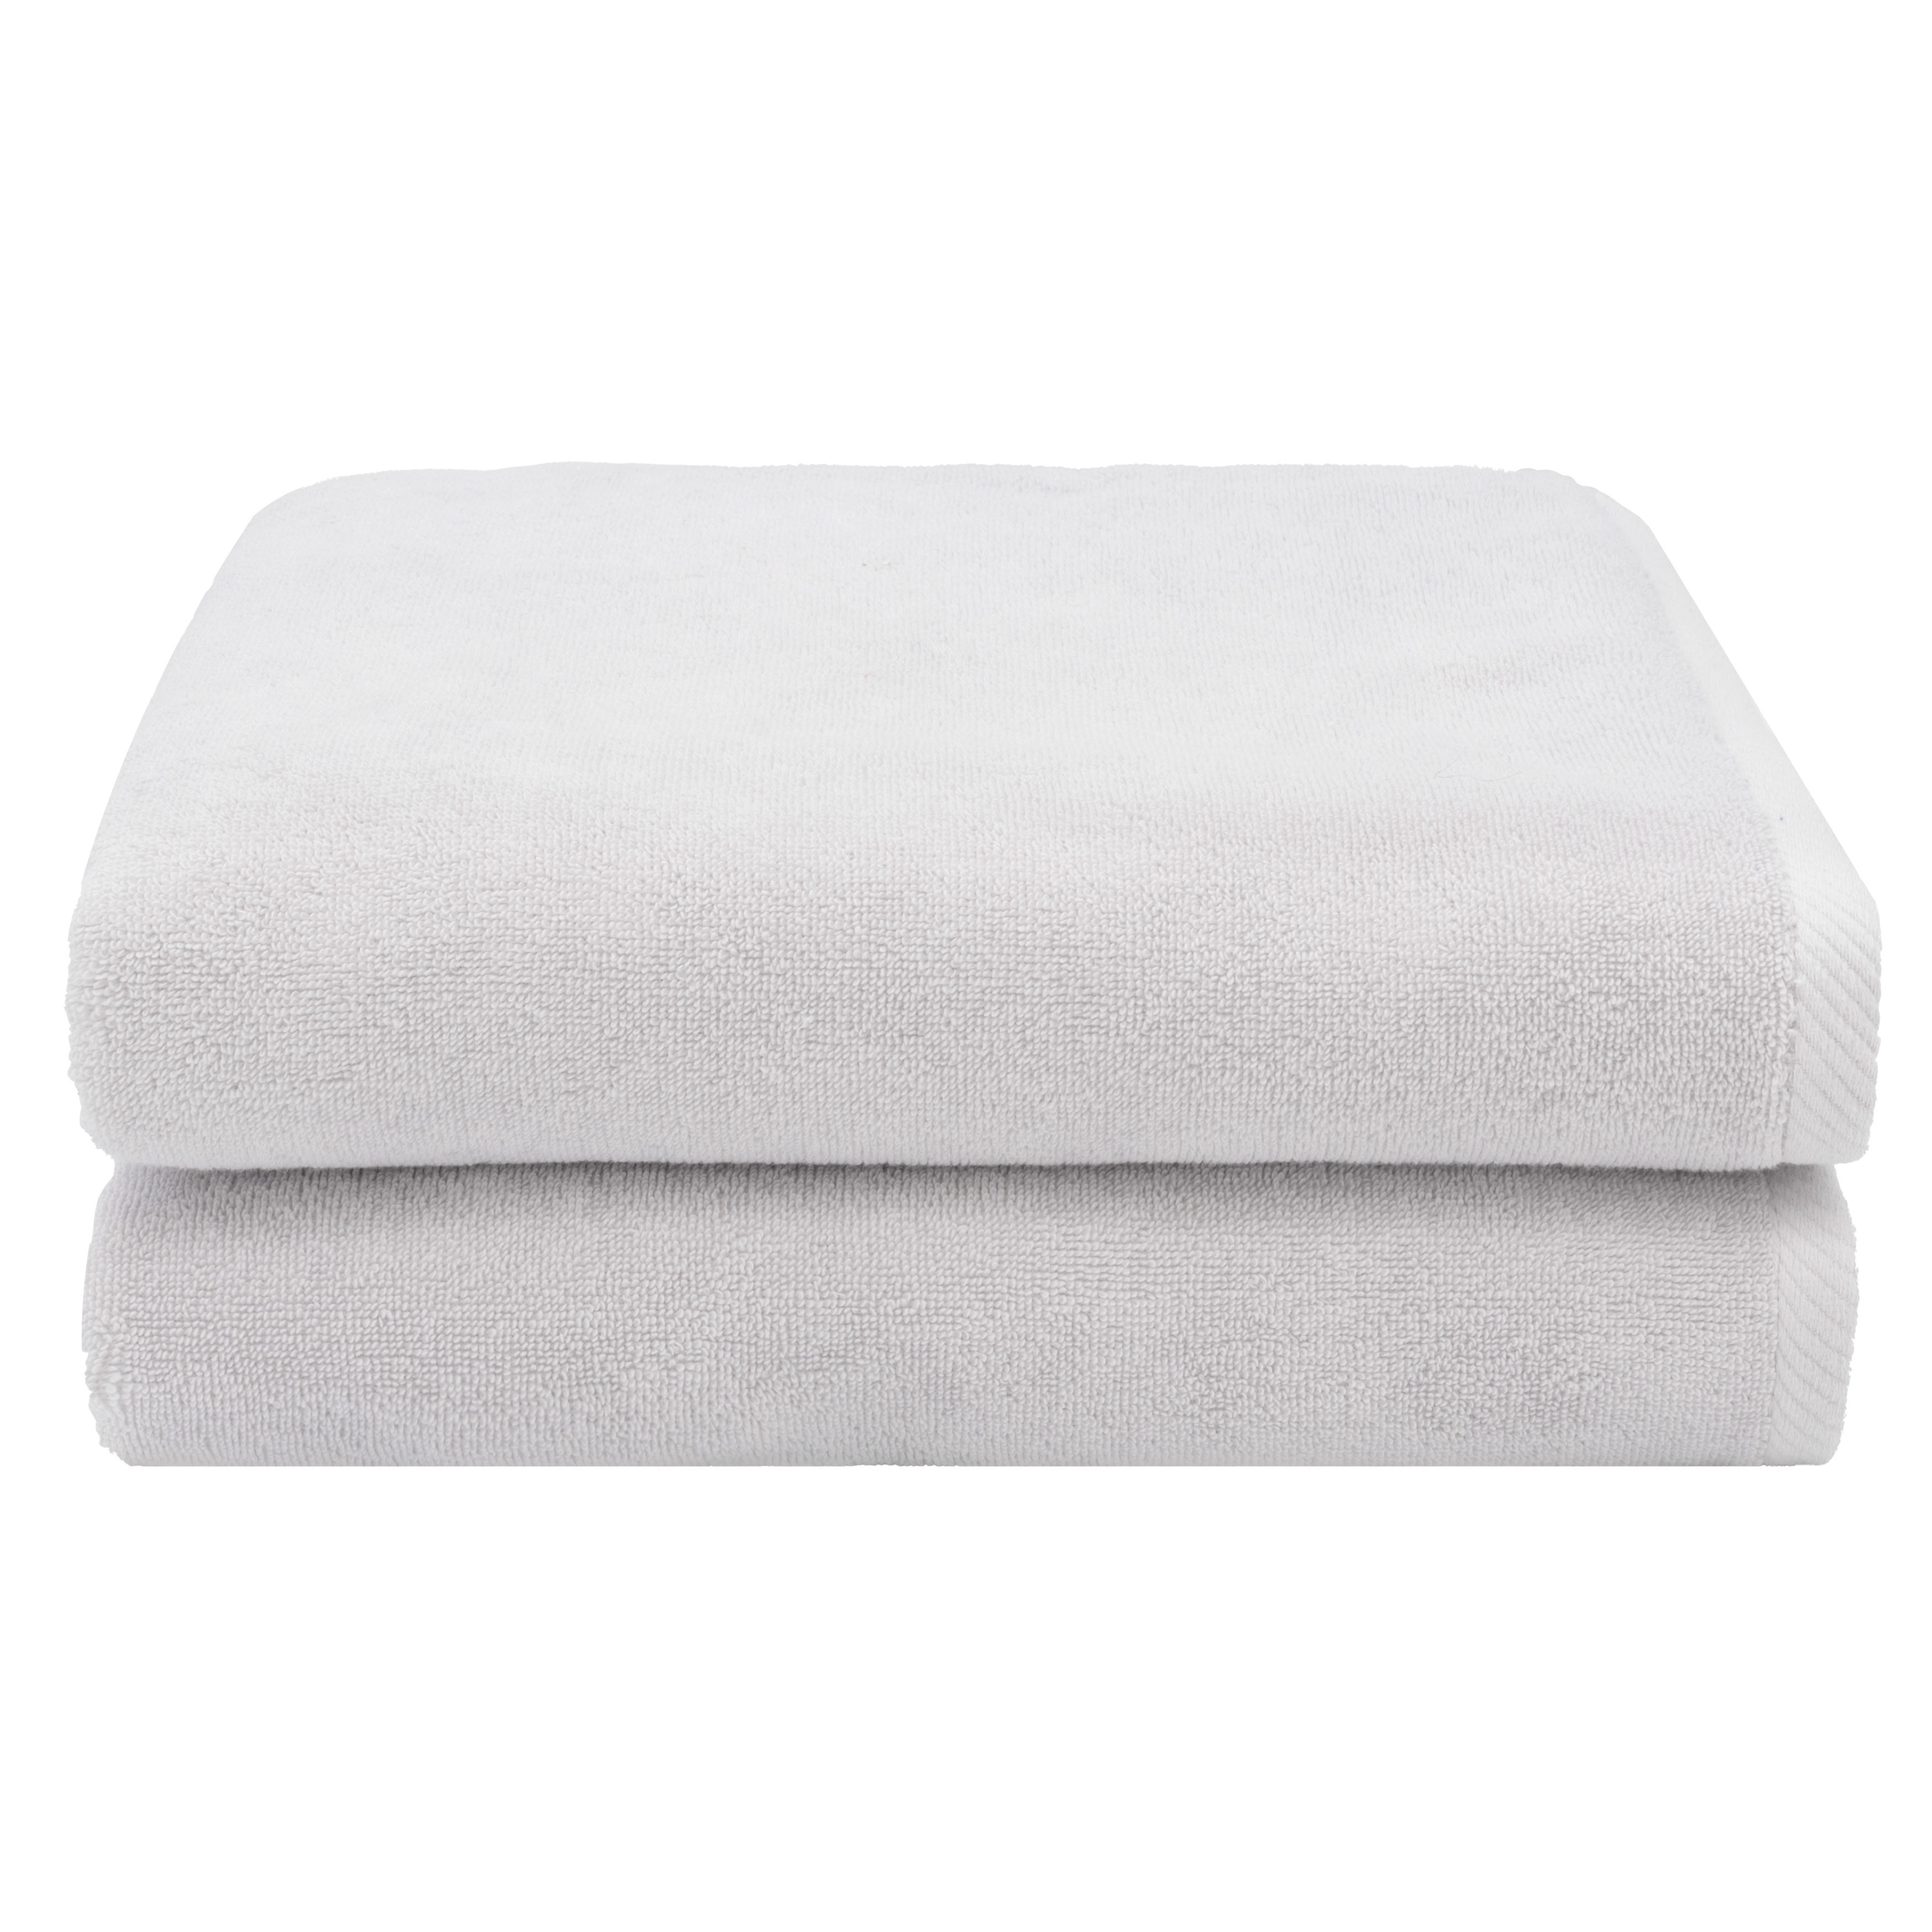 Authentic Hotel and Spa 100% Turkish Cotton Ediree...